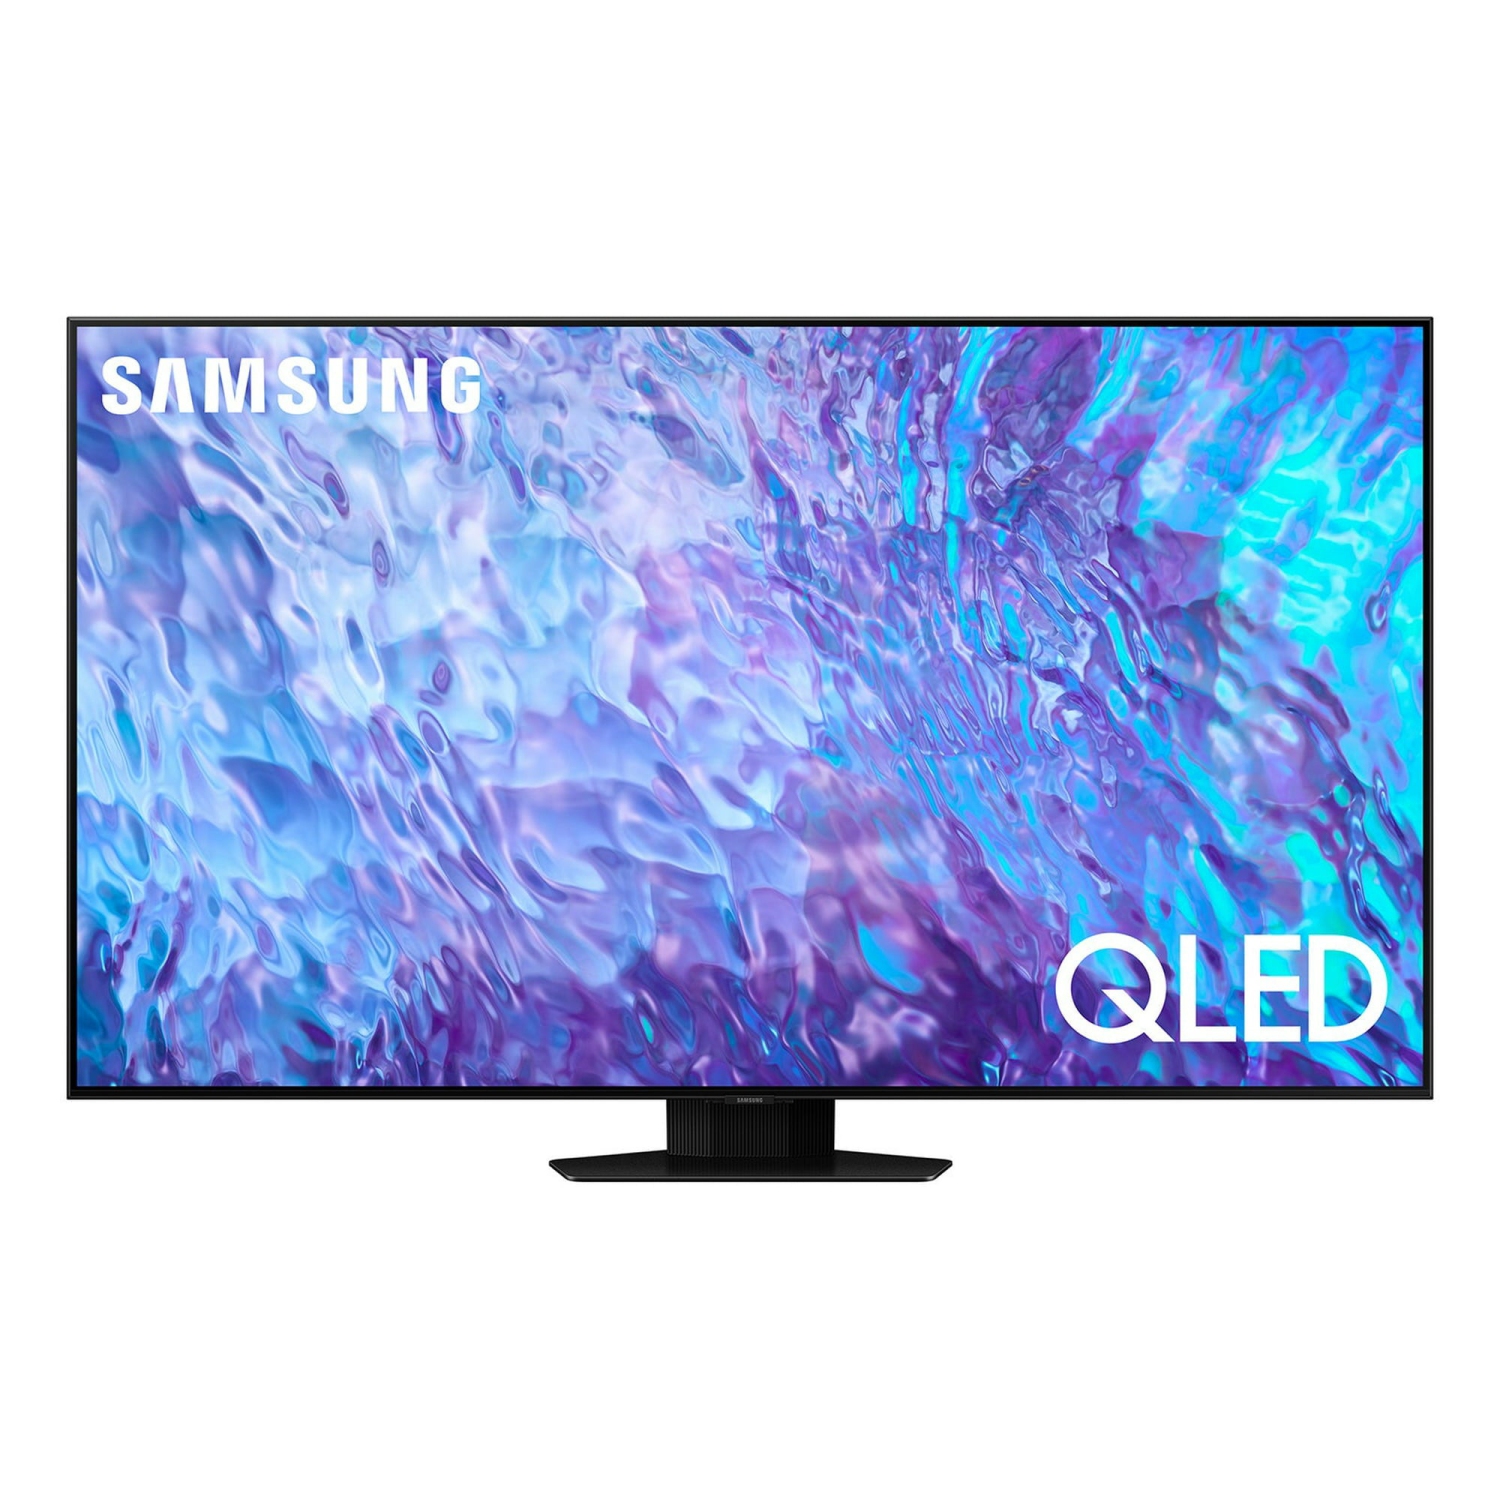 REFURBISHED(Good) - SAMSUNG 65" Class Q80C QLED 4K Smart TV (QN65Q80CD)**LOCAL VANCOUVER DELIVERY ONLY**